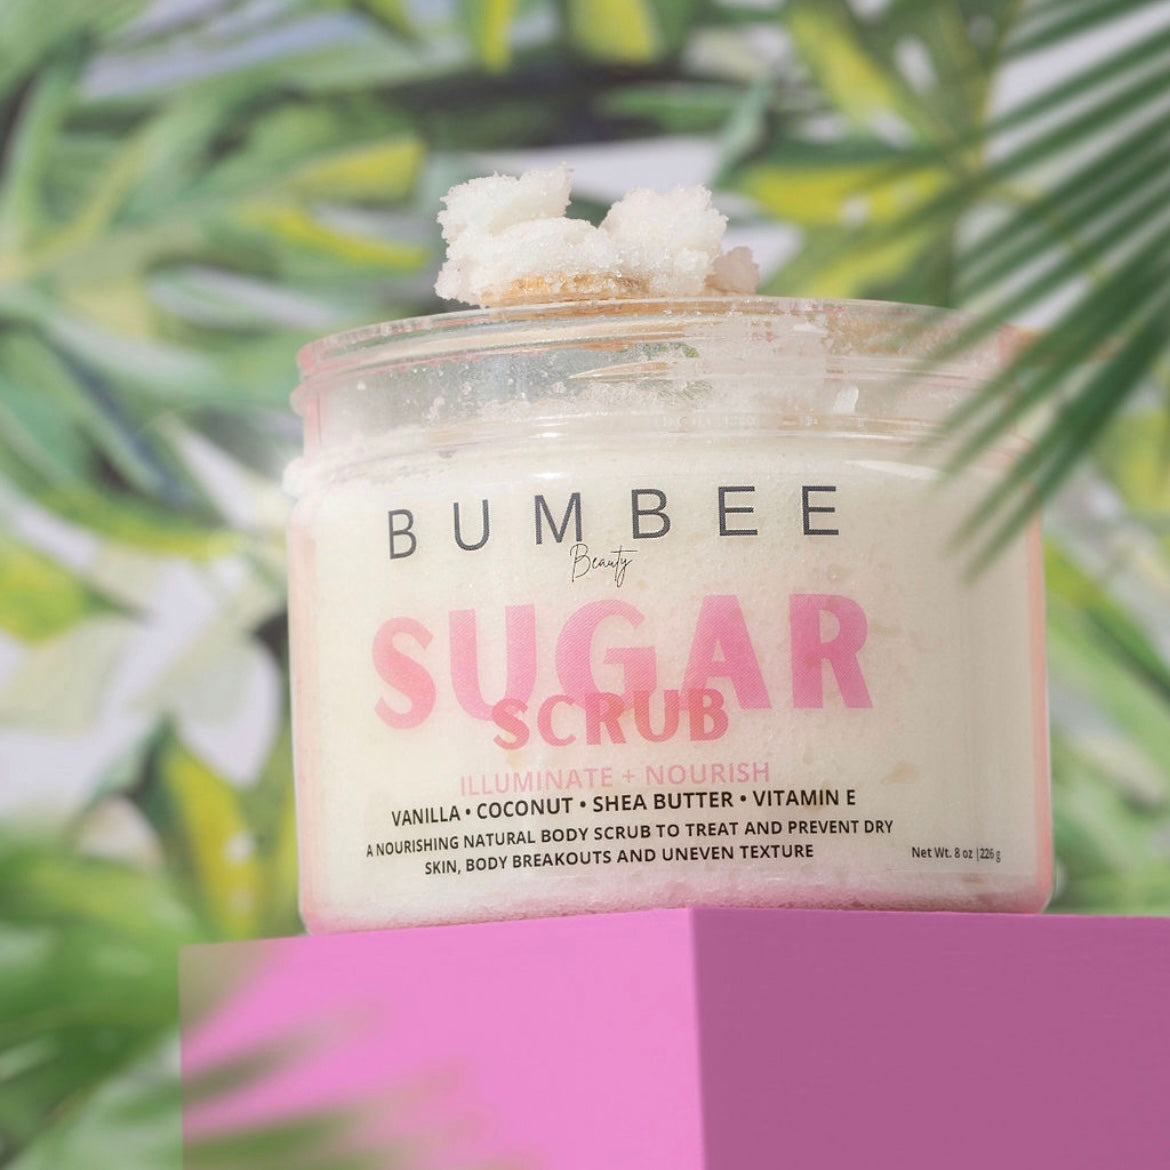 A jar of sugar scrub placed in a tropical setting, with the scrub's textured surface visible on top of the jar. The image evokes a sense of relaxation and indulgence, highlighting the product's natural ingredients and luxurious feel